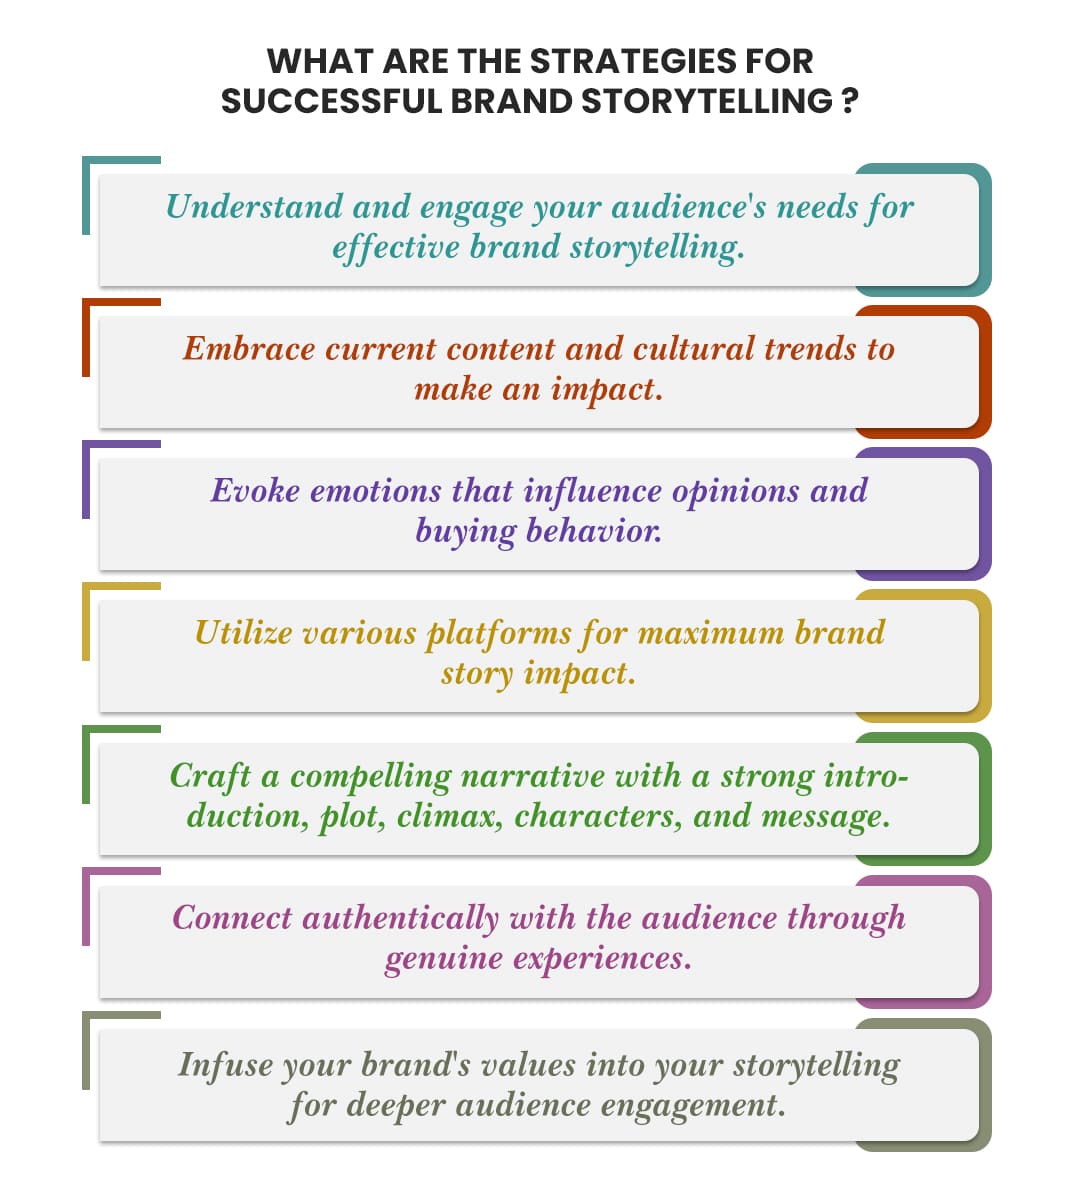 What are the Strategies for successful brand storytelling?